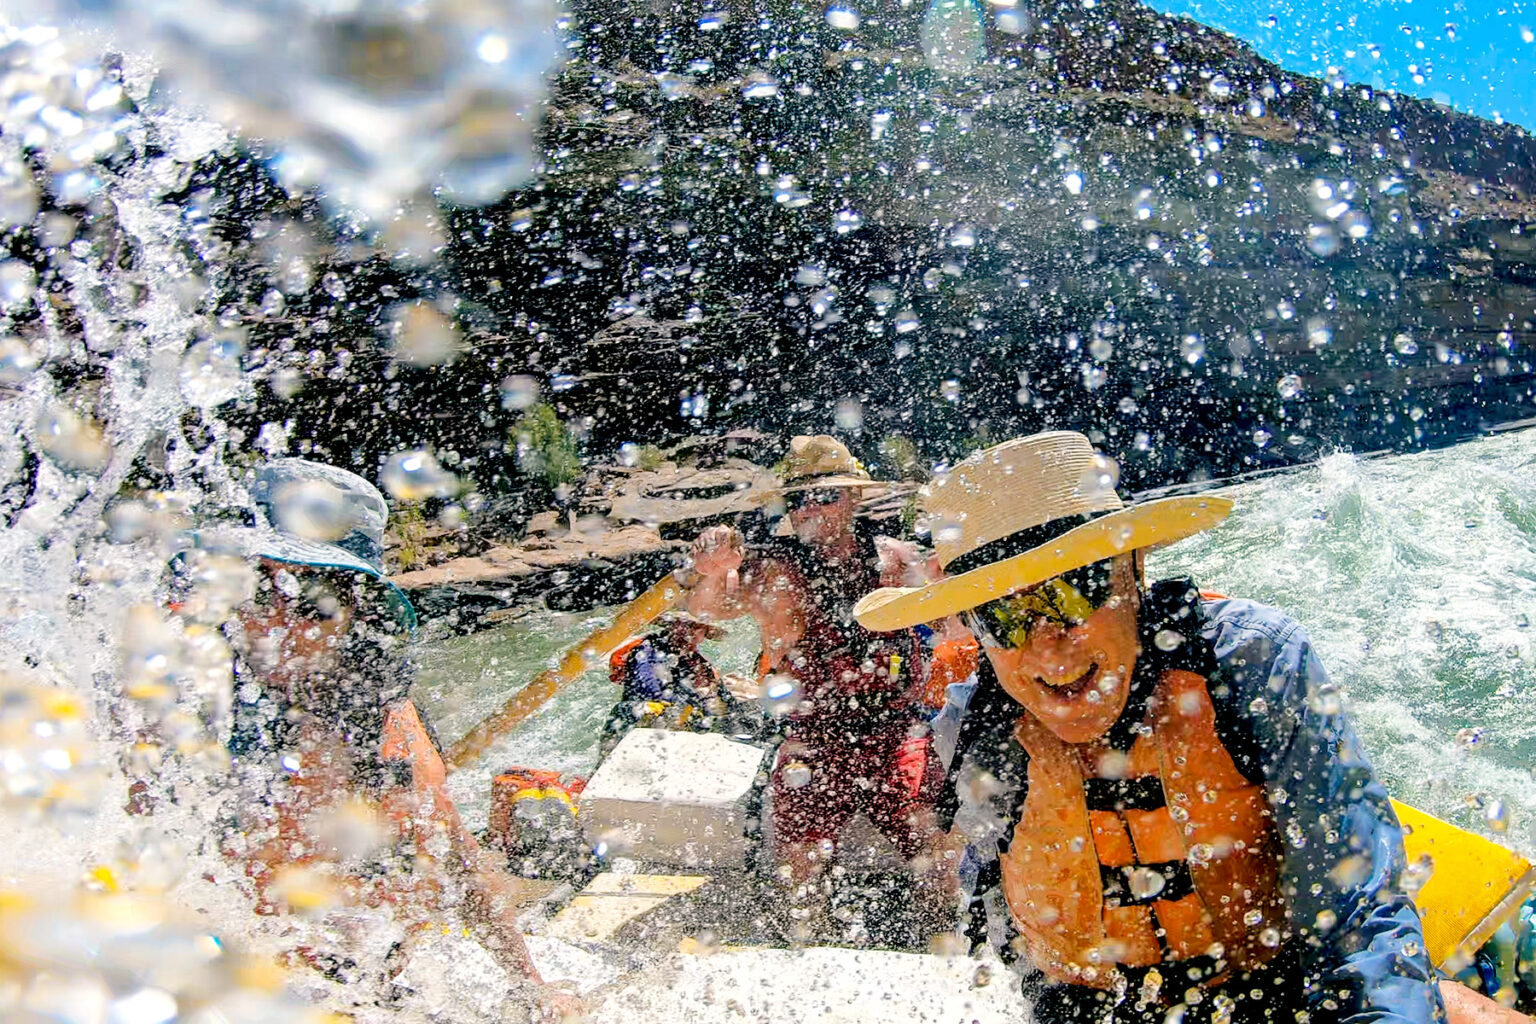 Happy guest in straw hat gets wet in whitewater Grand Canyon